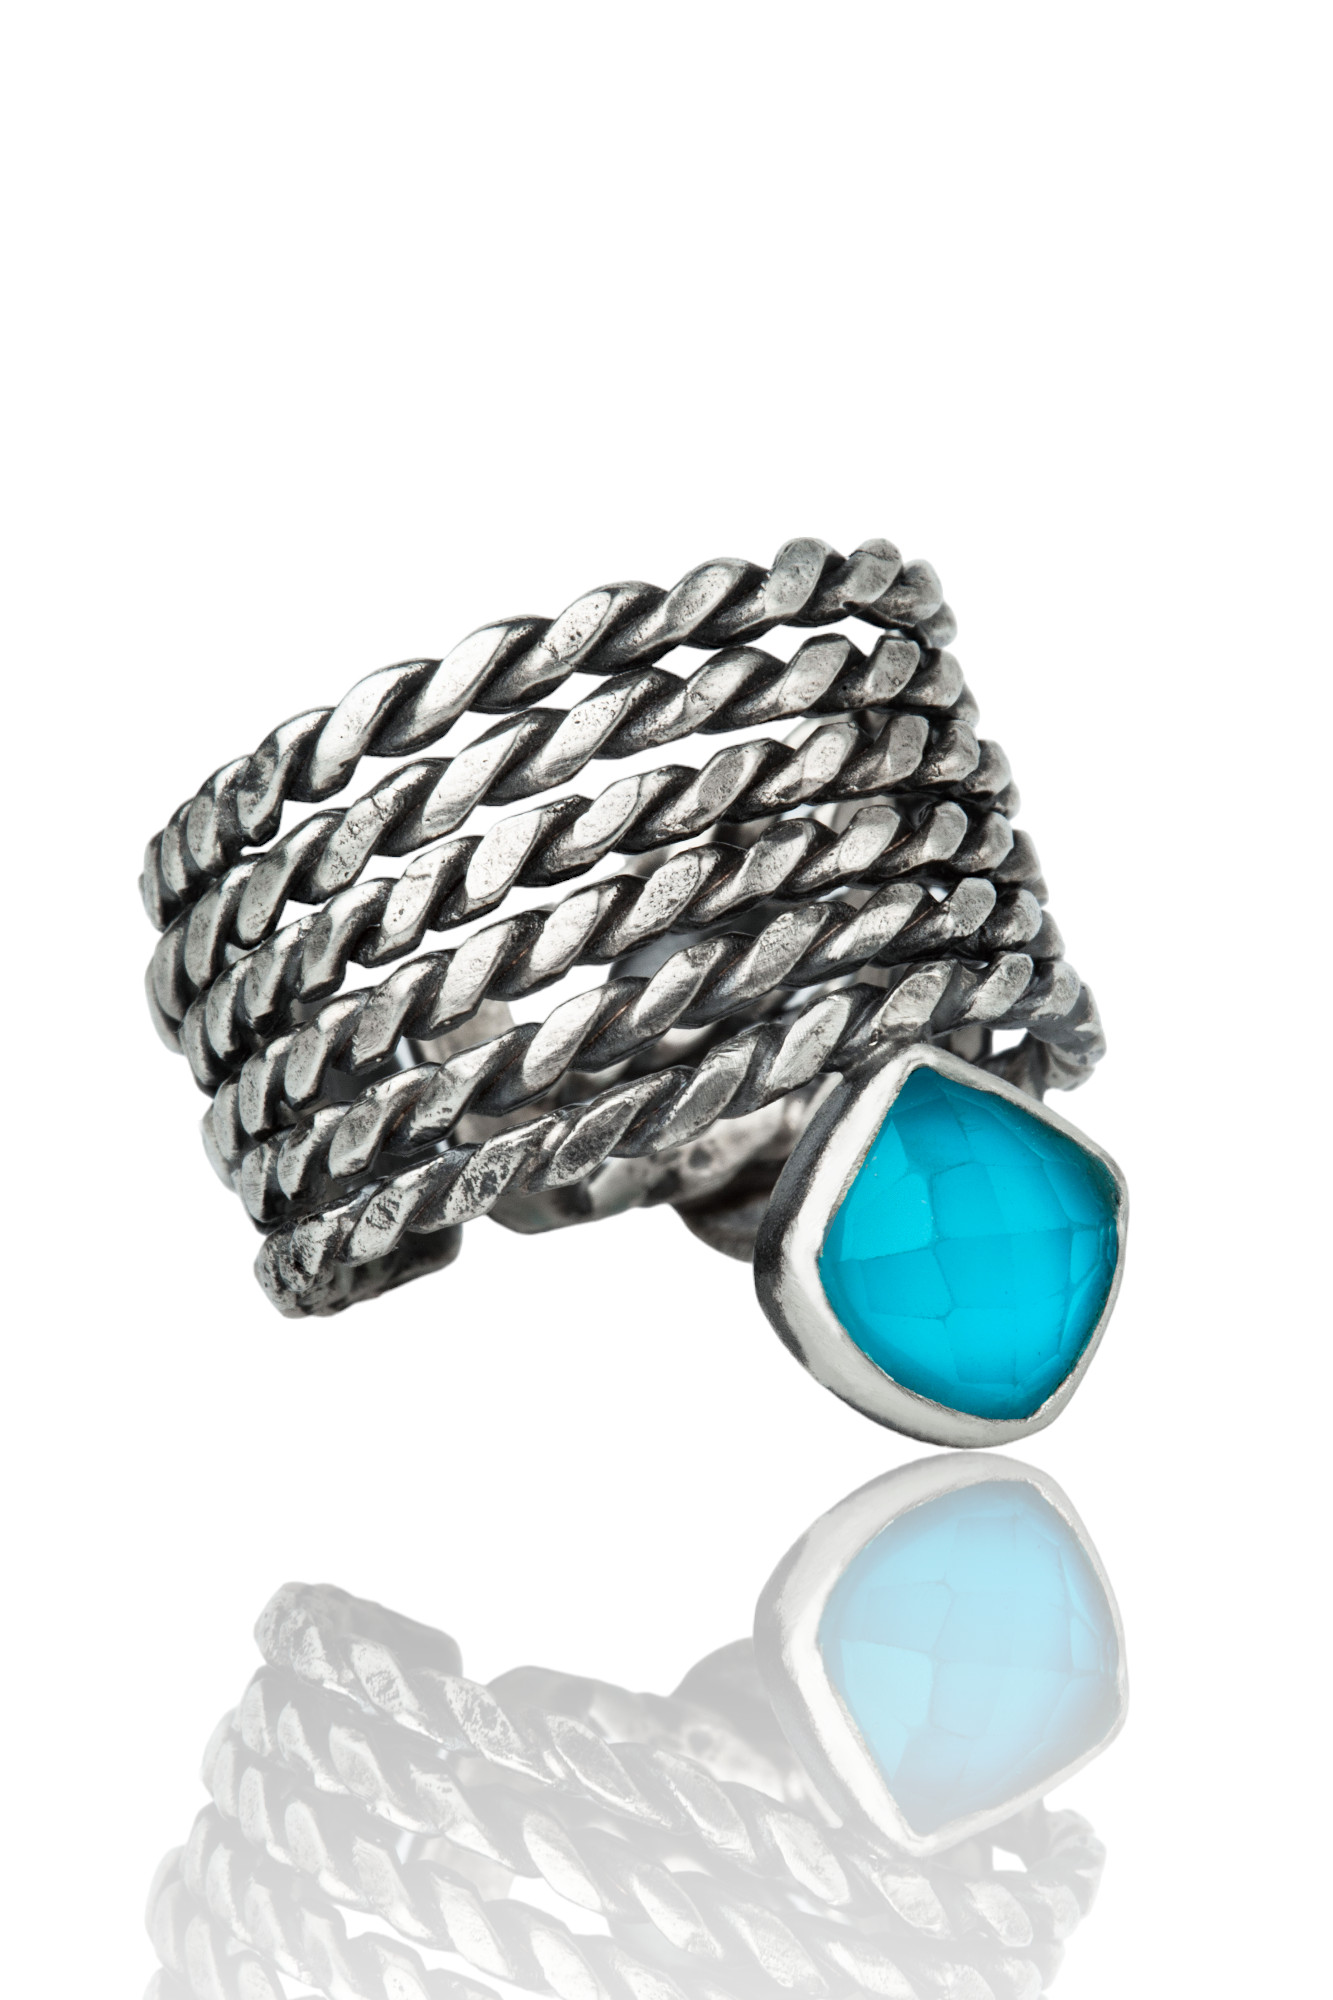 Turquoise handmade oxidized silver ring